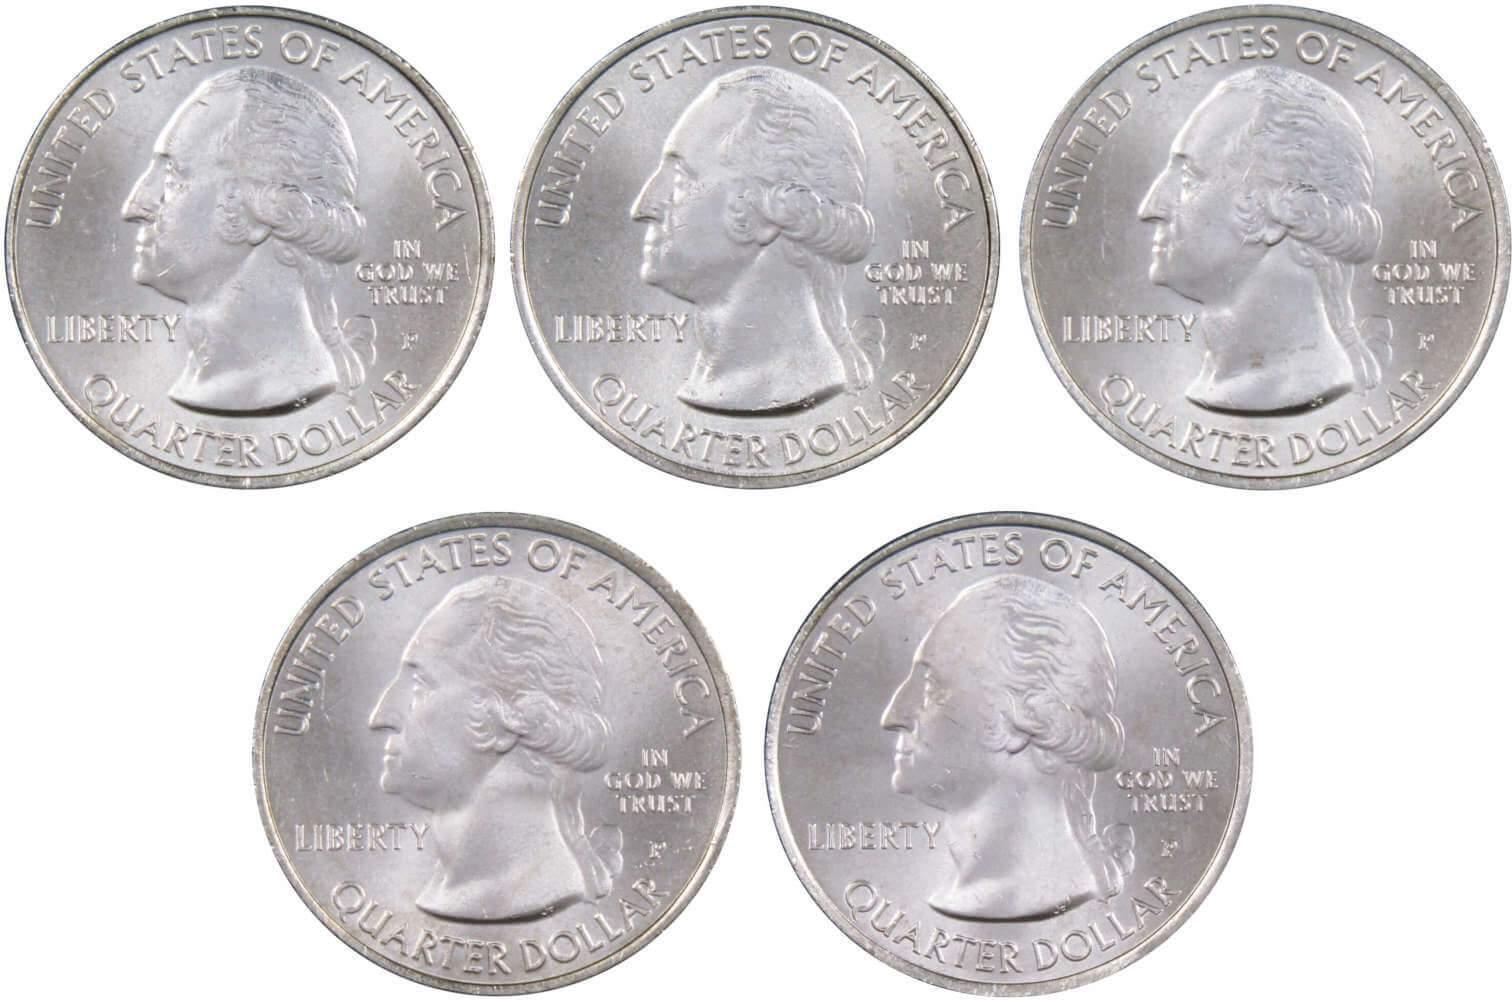 2011 P National Park Quarter 5 Coin Set Uncirculated Mint State 25c Collectible